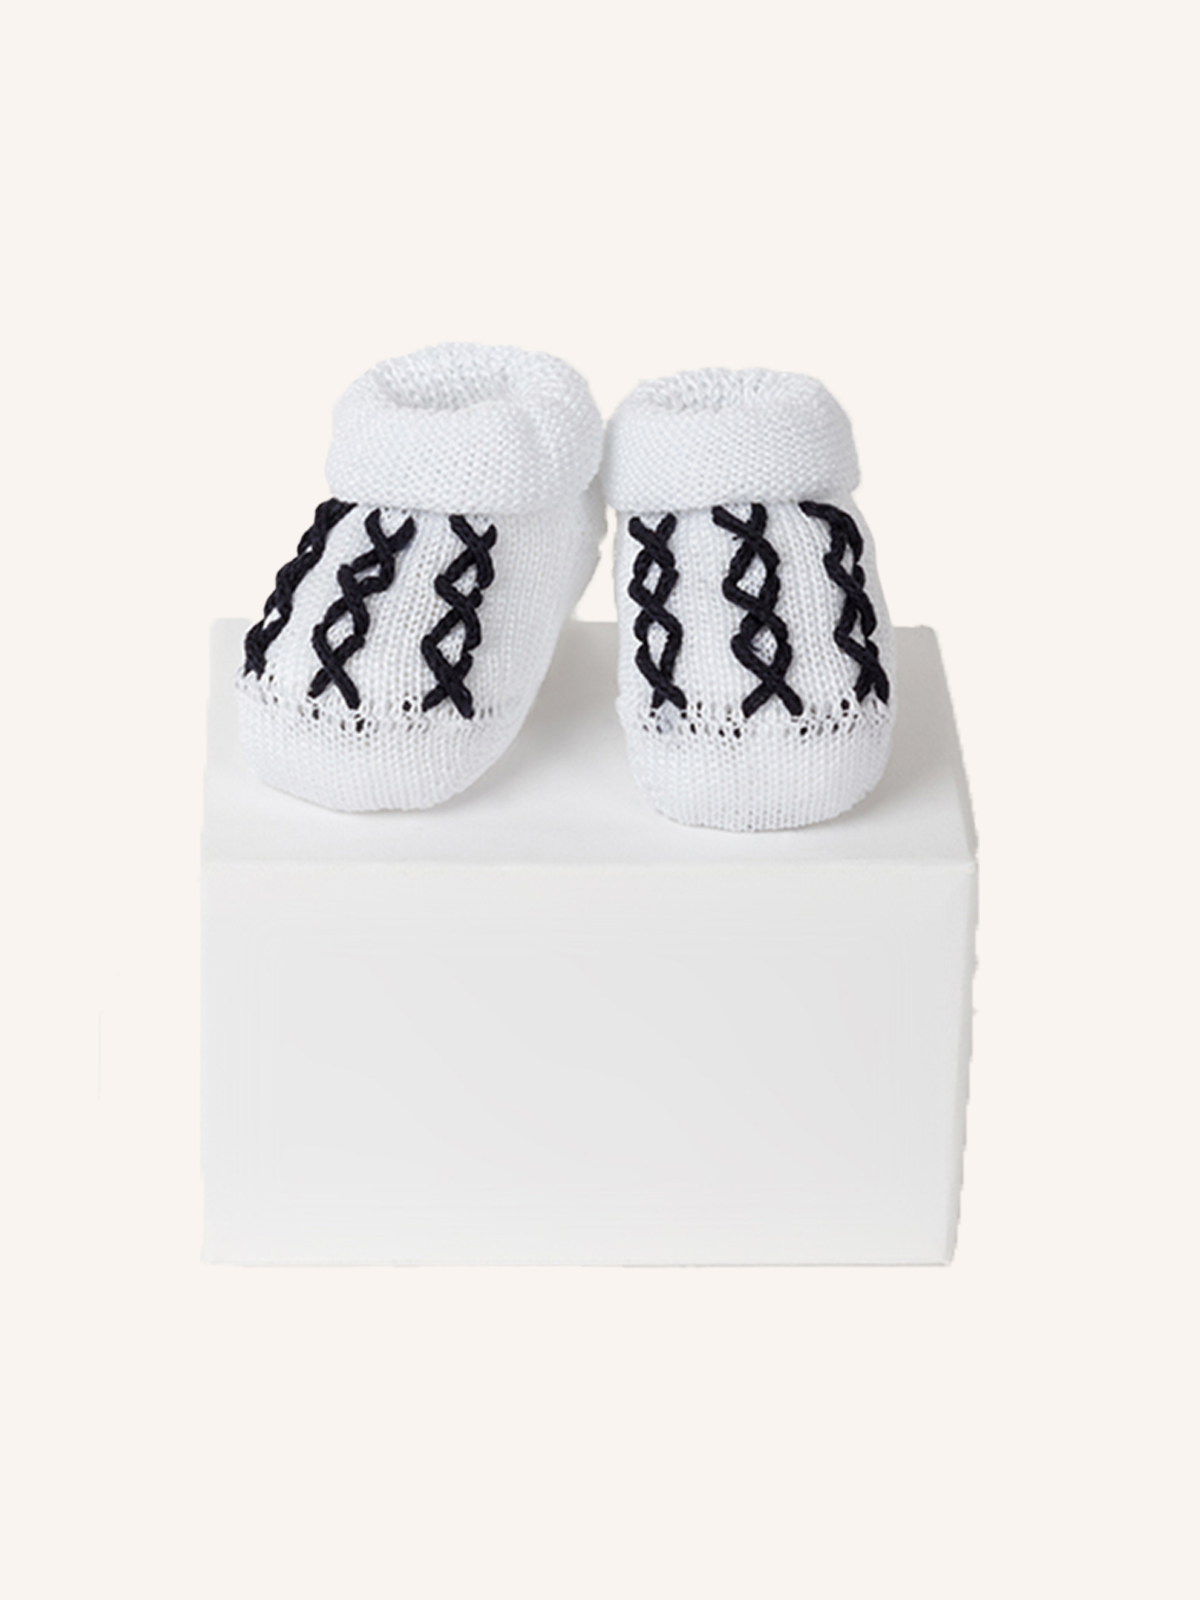 Slipper in Cotton with X Embroidery for Newborn | Solid Color | Pack of 1 Pair | 42344